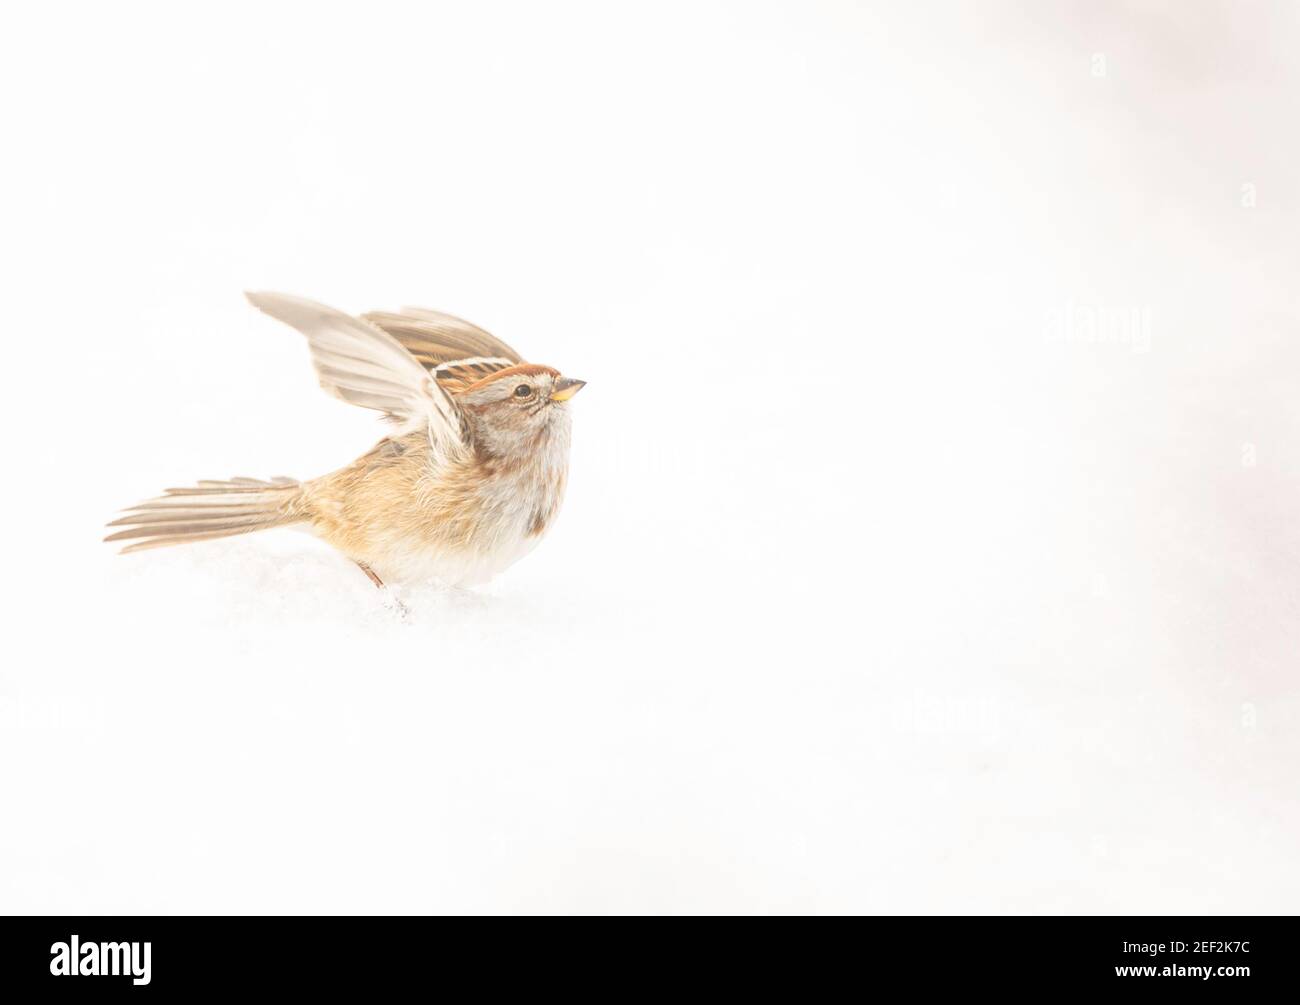 An American Tree Sparrow hopping in the snow on a cold February morning.  Snow makes up the almost entirely white background in this overexposed image Stock Photo